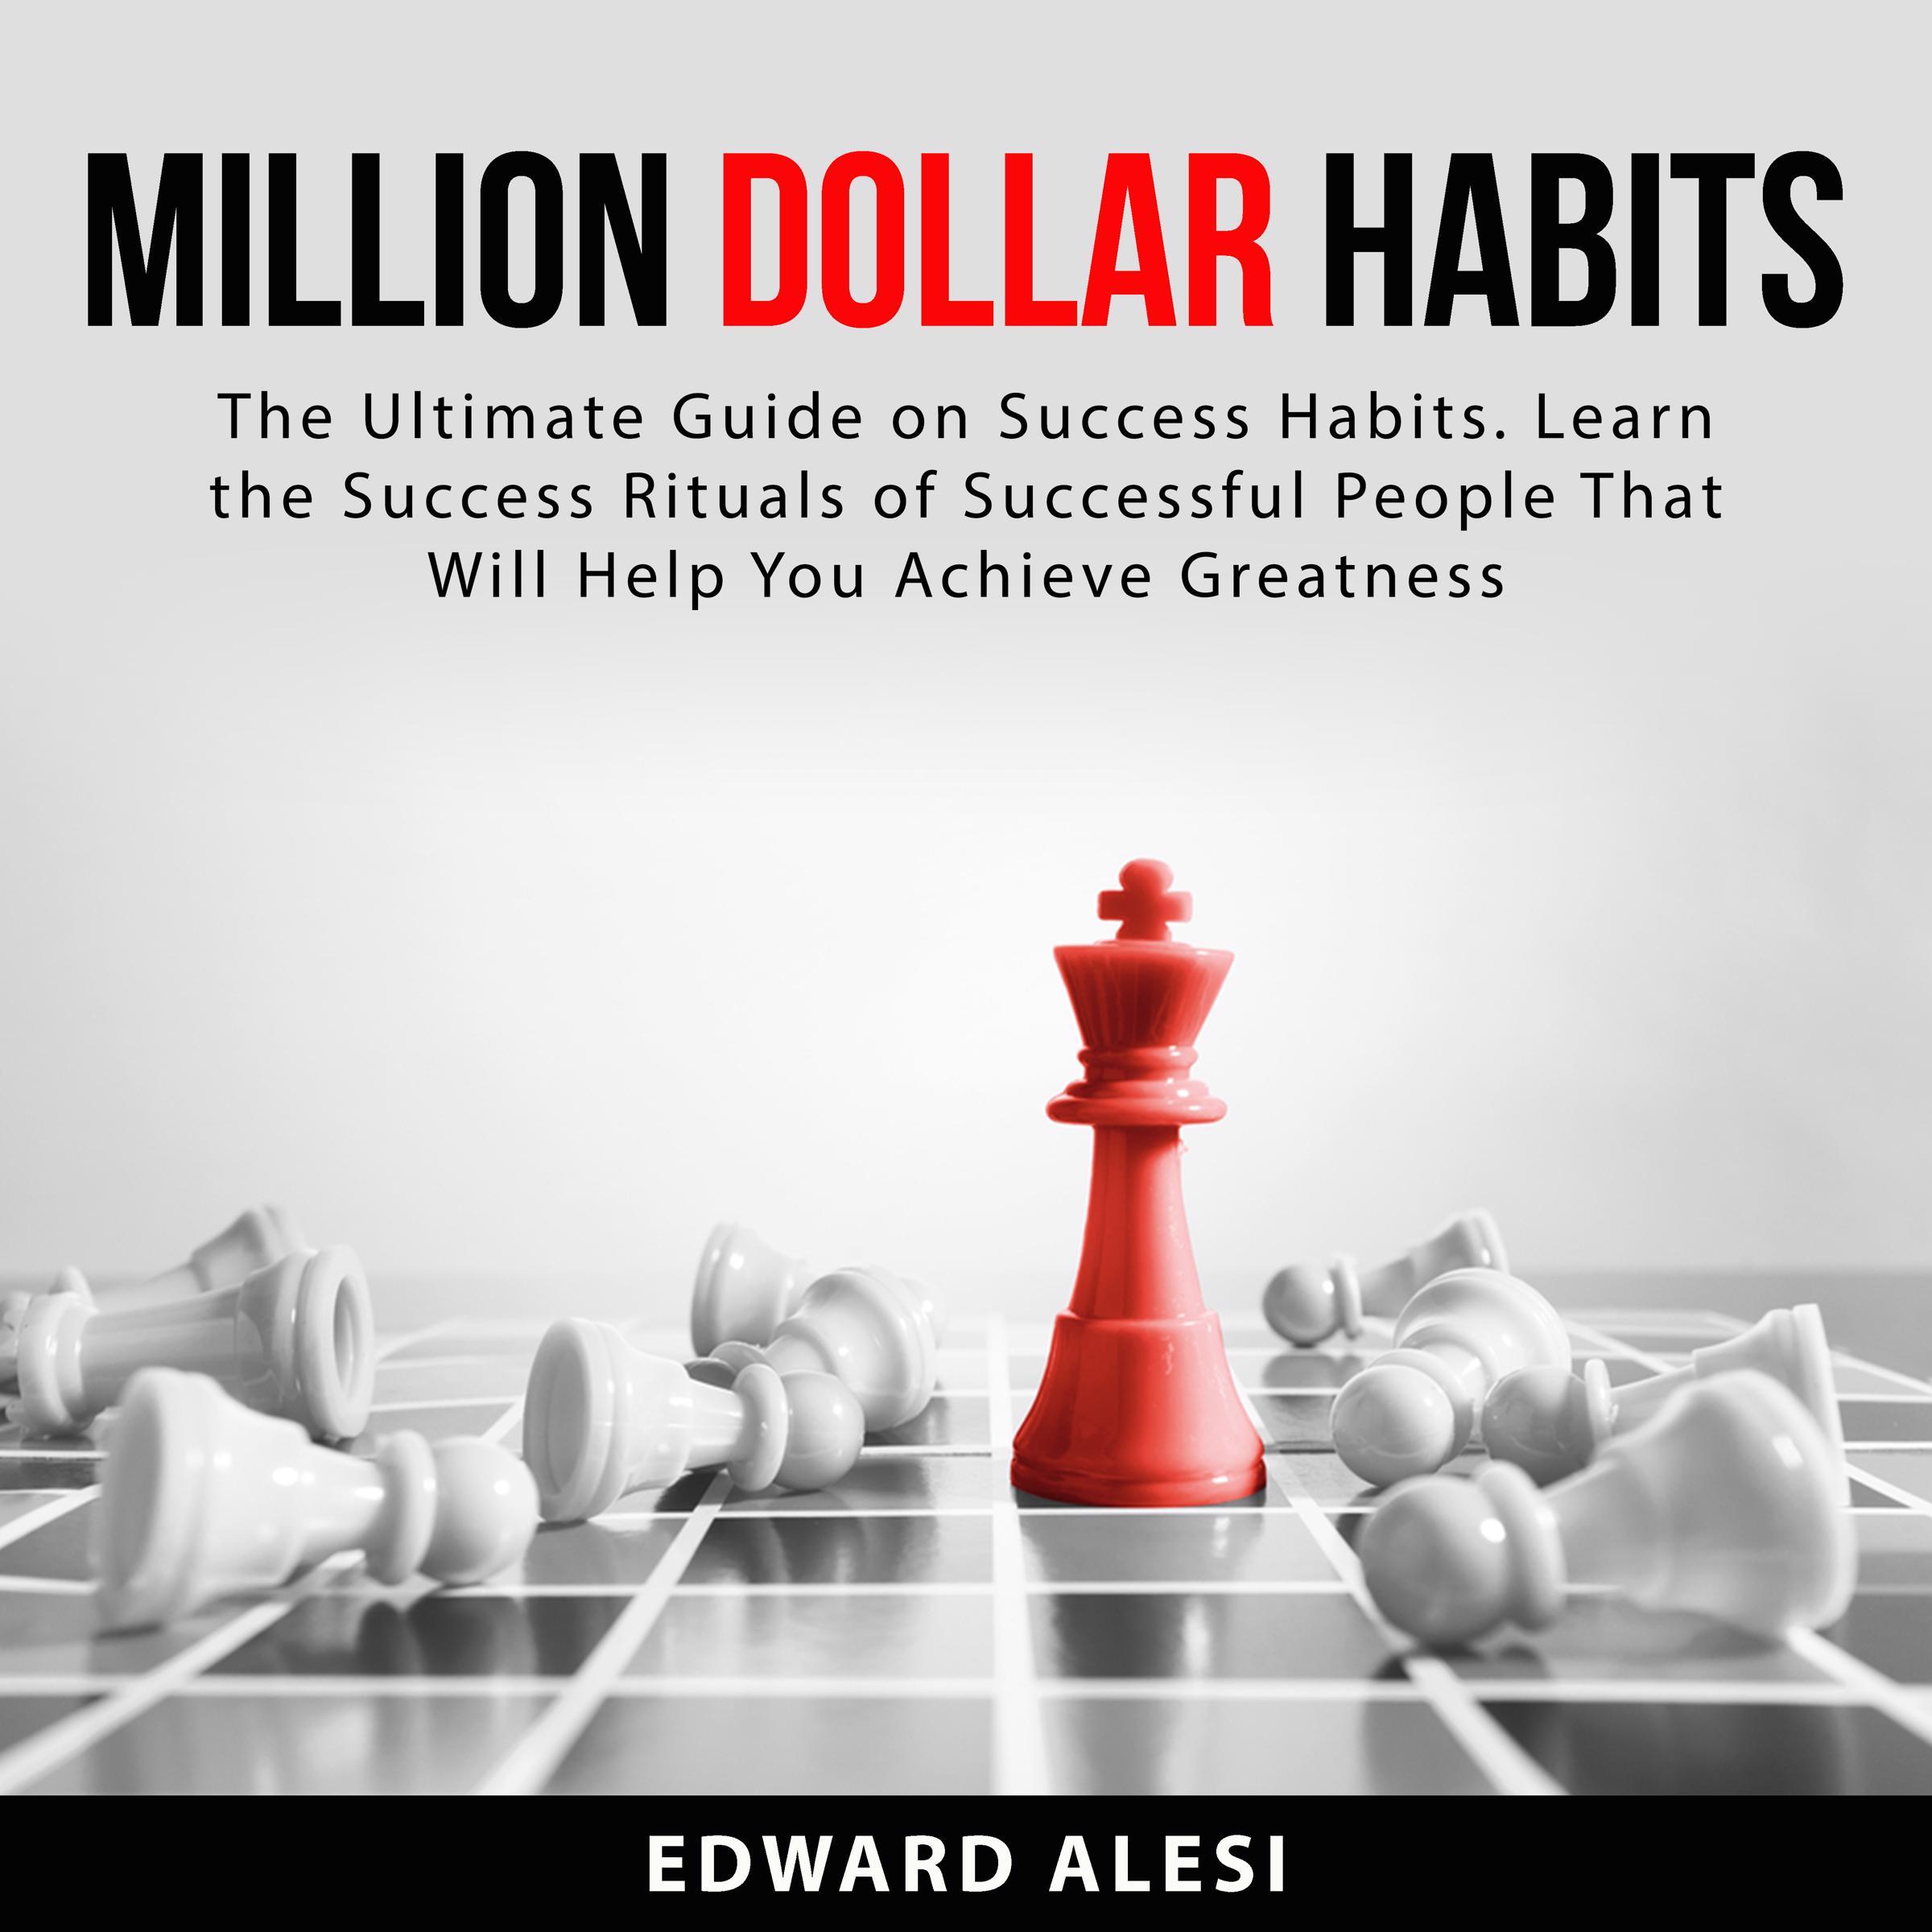 Million Dollar Habits: The Ultimate Guide on Success Habits. Learn the Success Rituals of Successful People That Will Help You Achieve Greatness